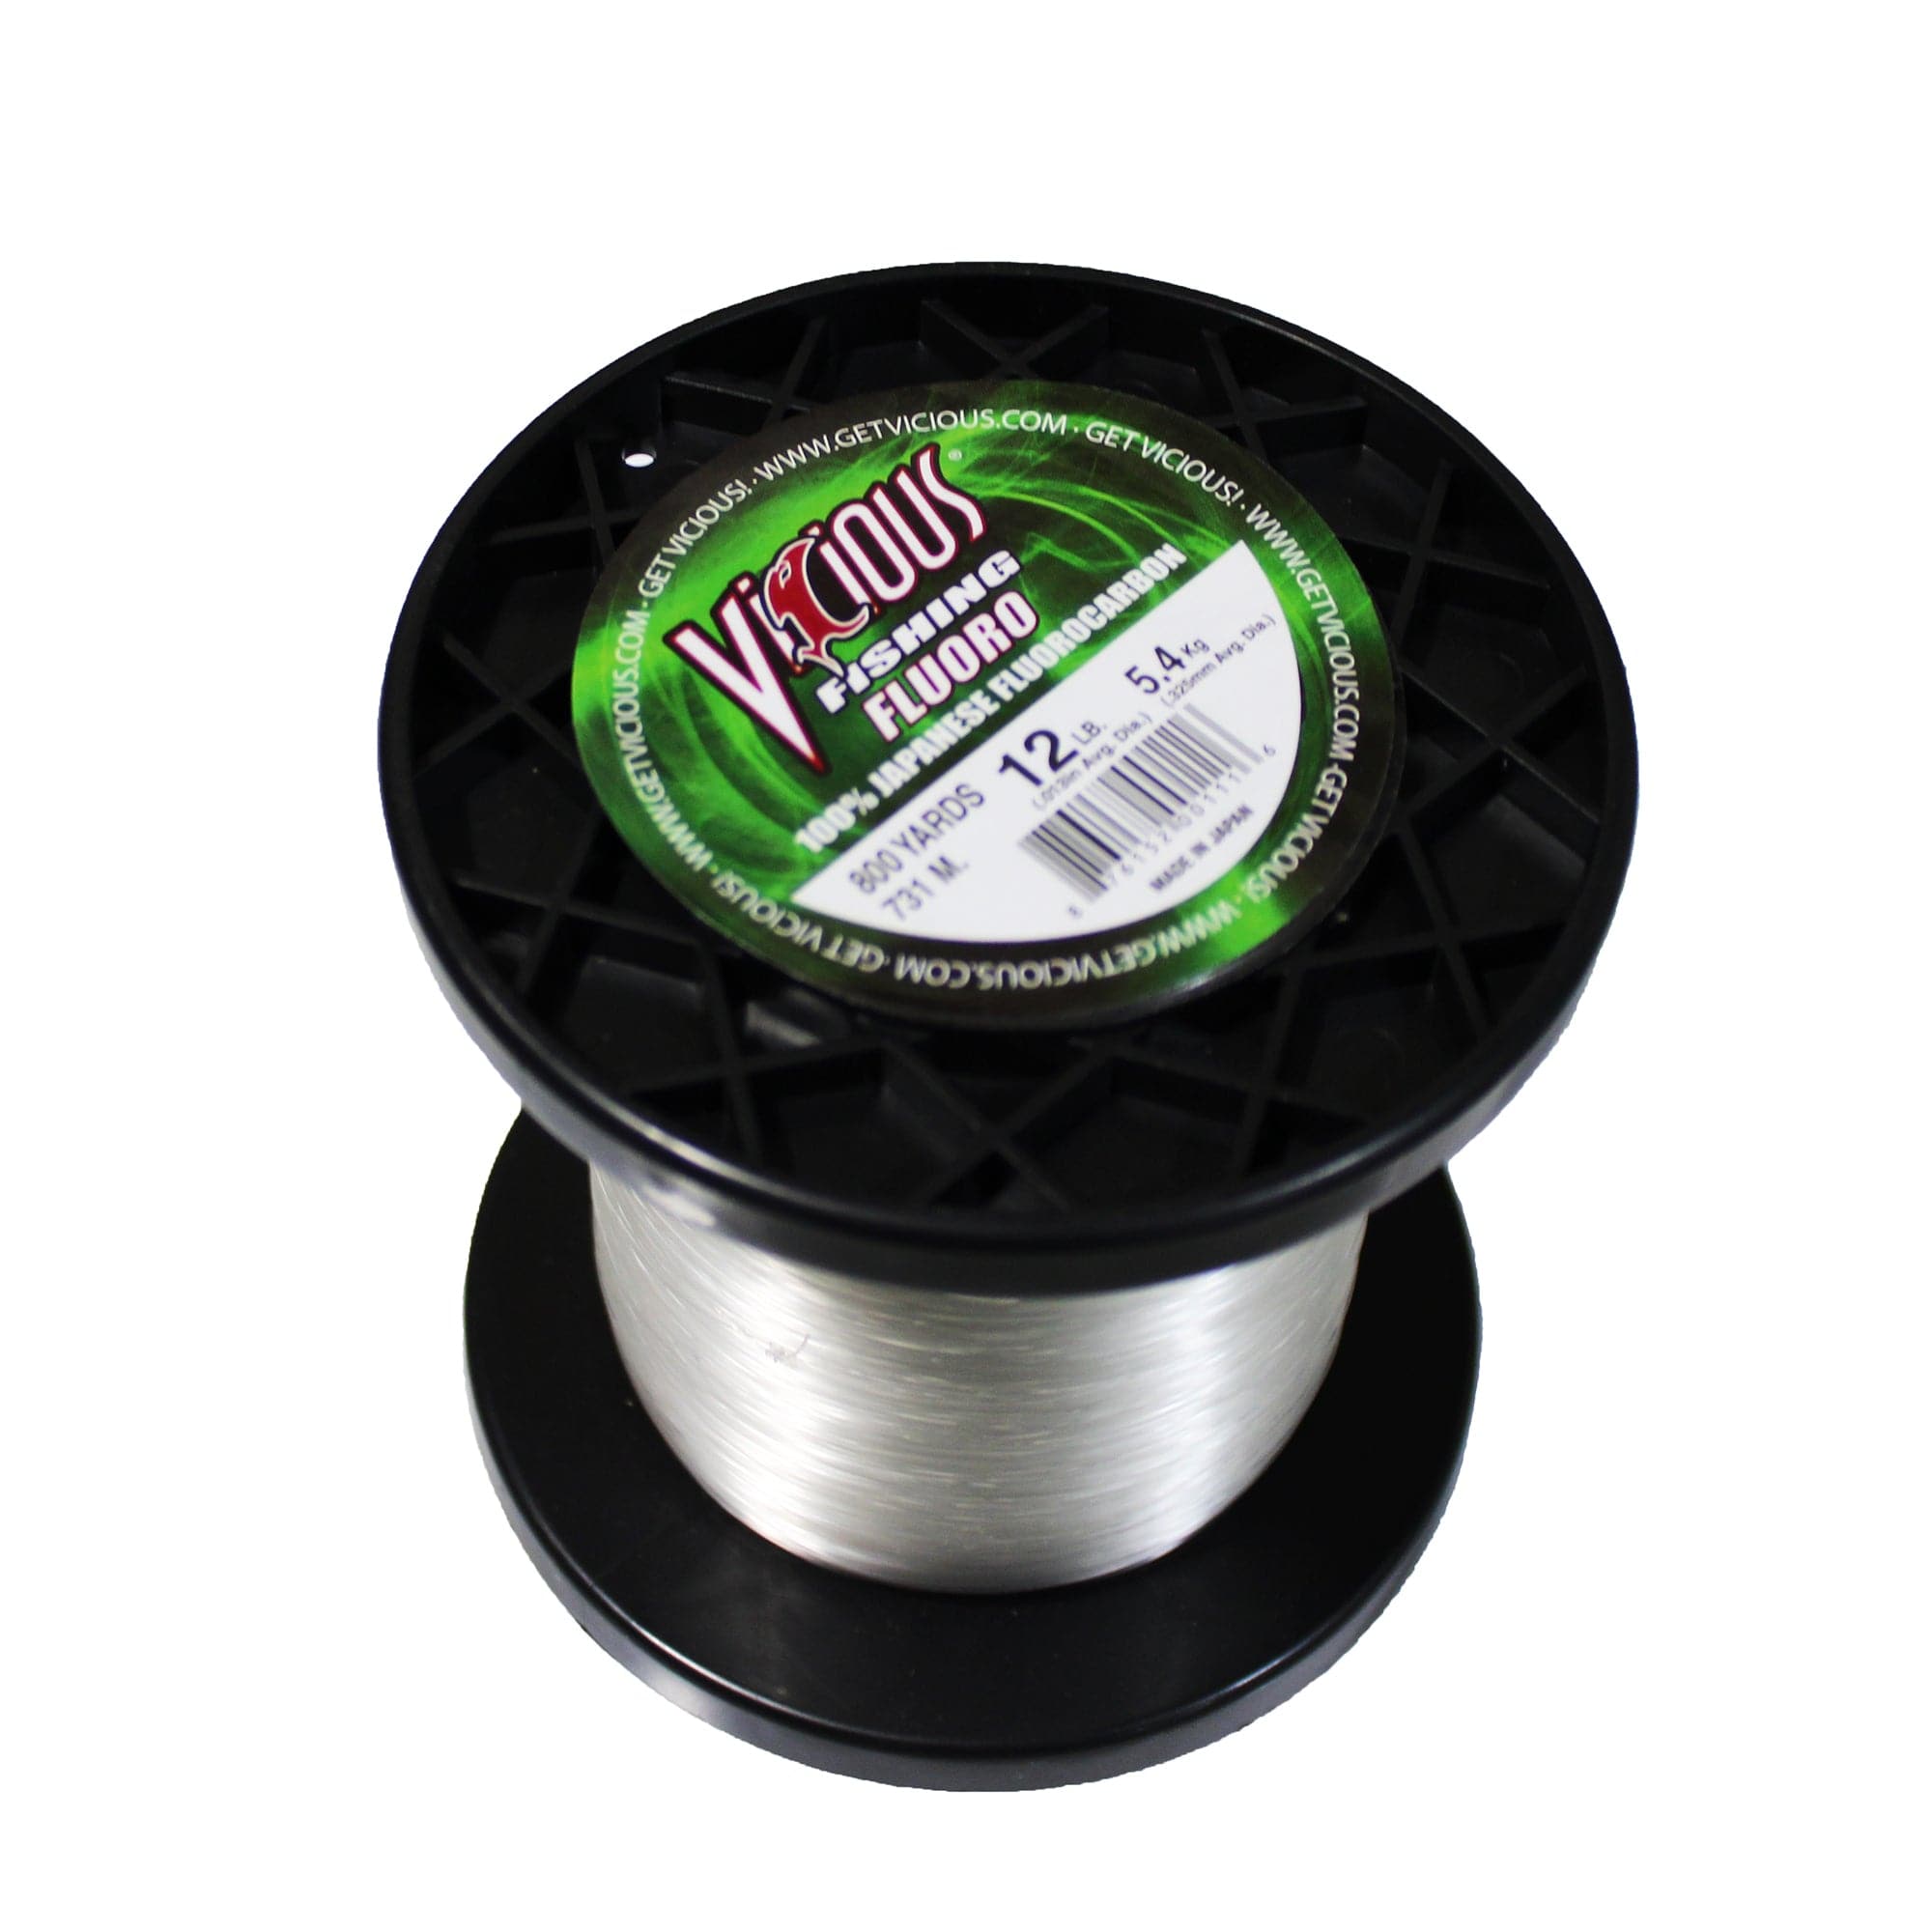 Vicious Fishing Fluoro Clear FLB 100% Fluorocarbon Fishing Line - 800 Yards